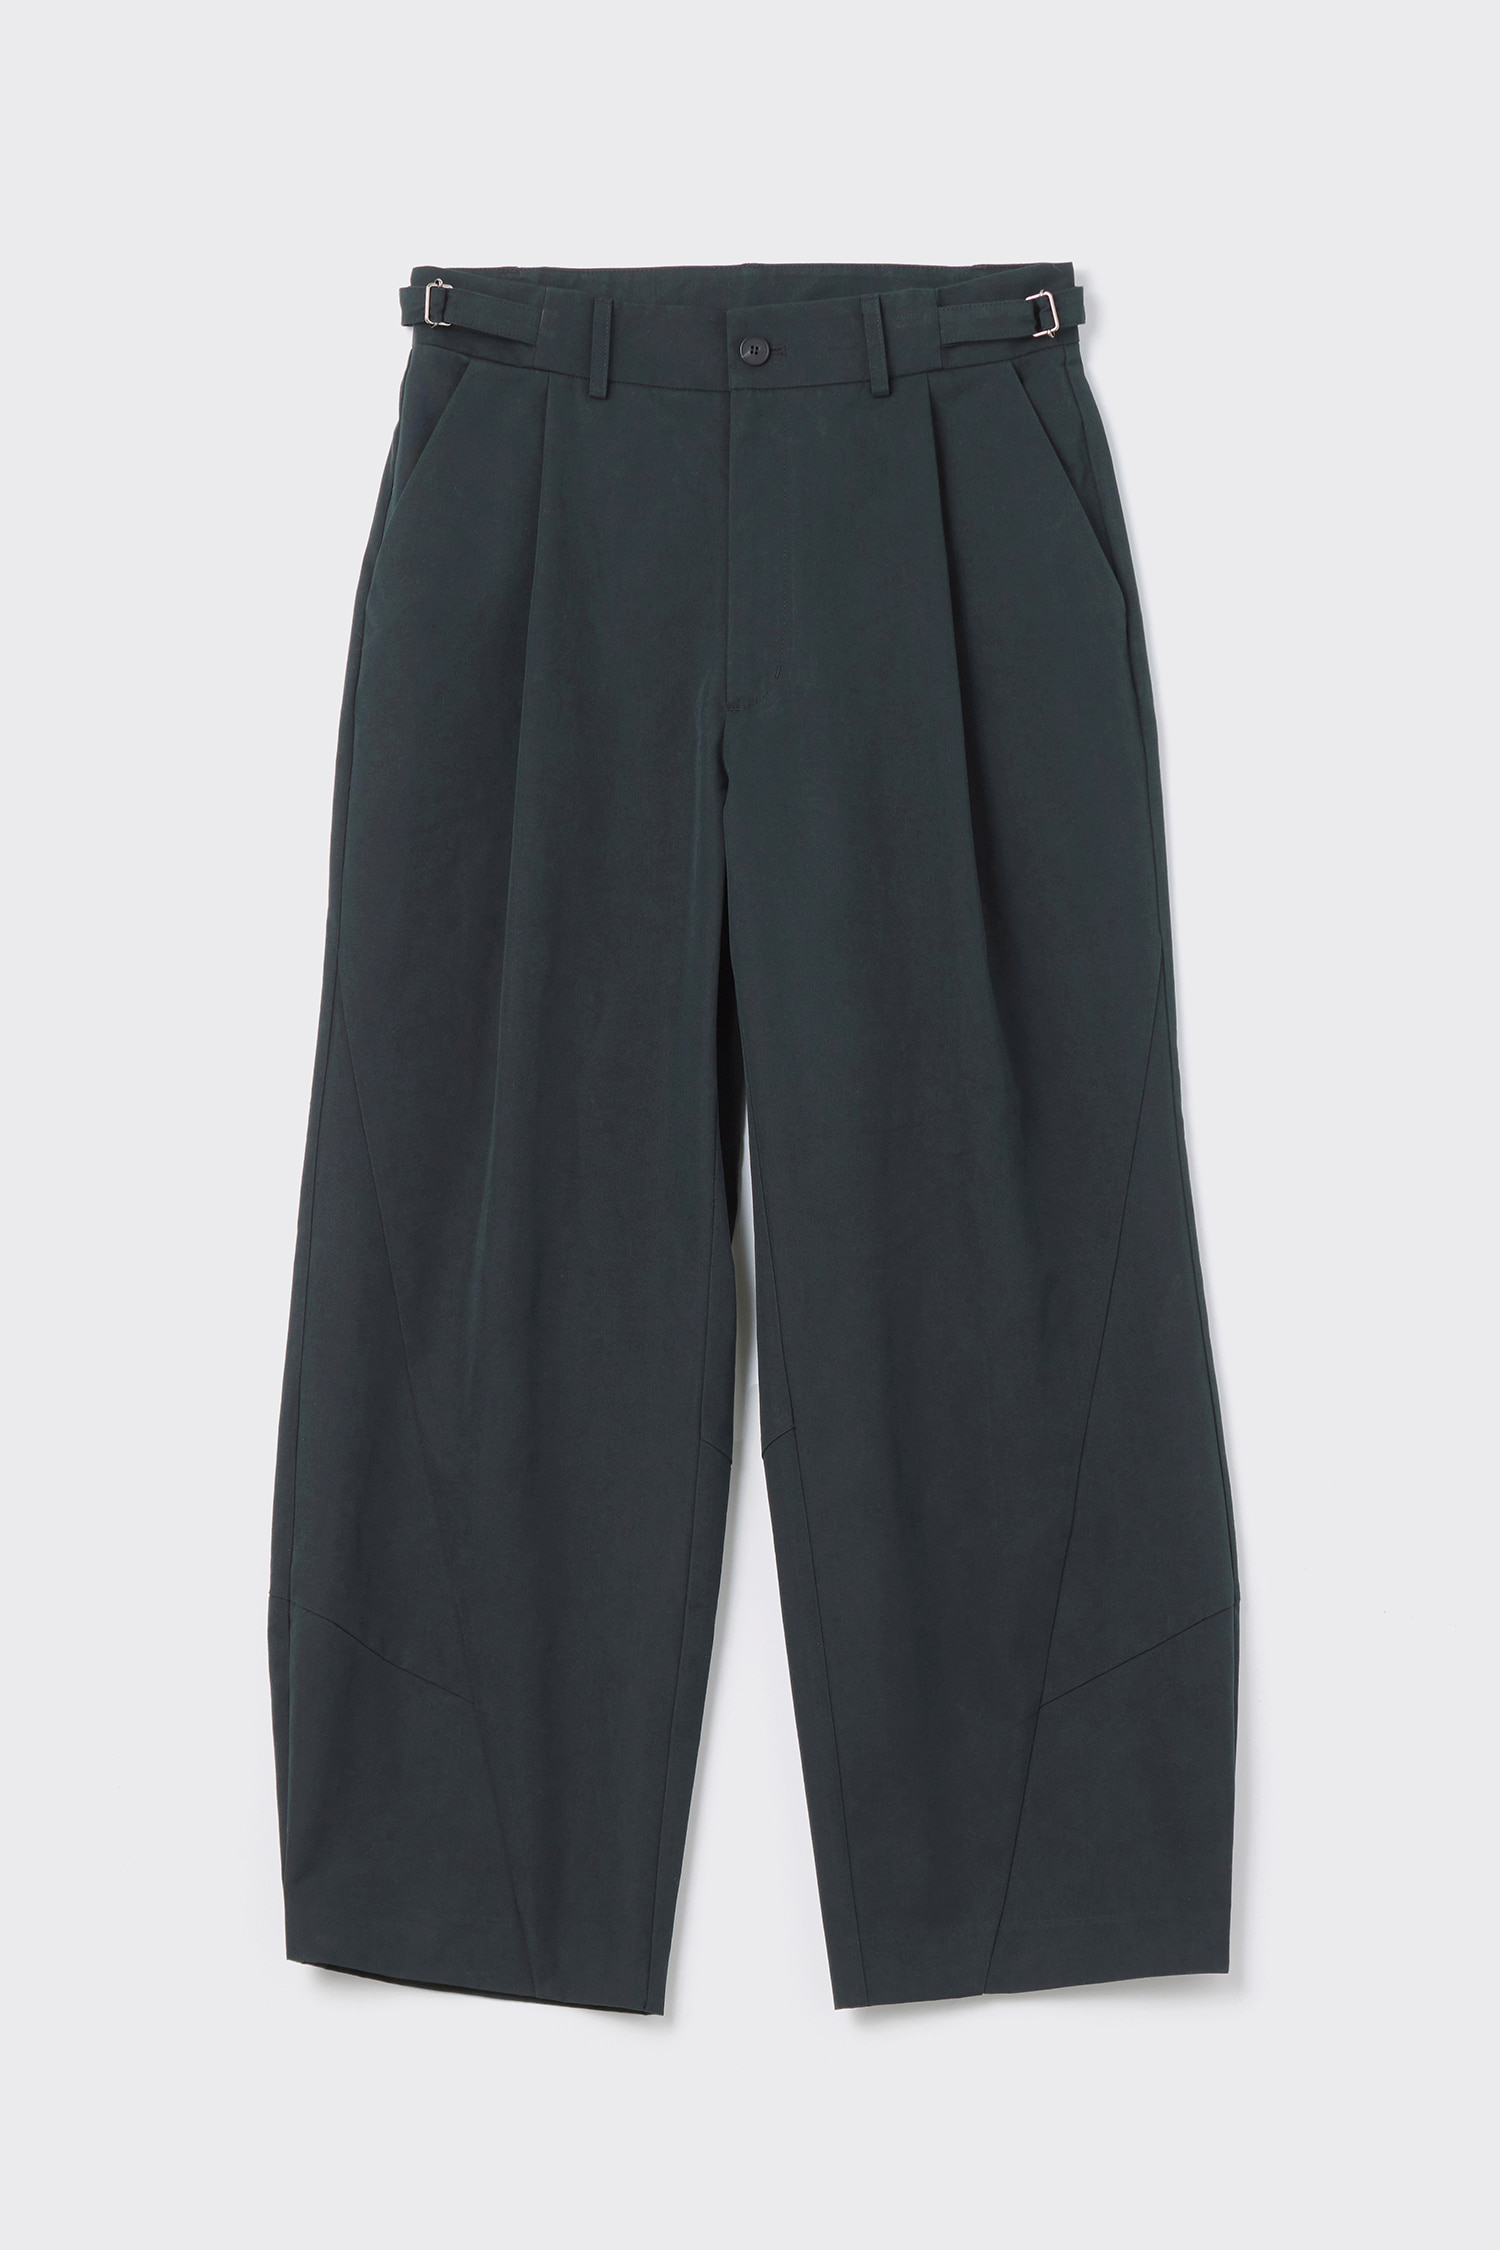 [soui. Exclusive] Triangle Trousers Forest Navy